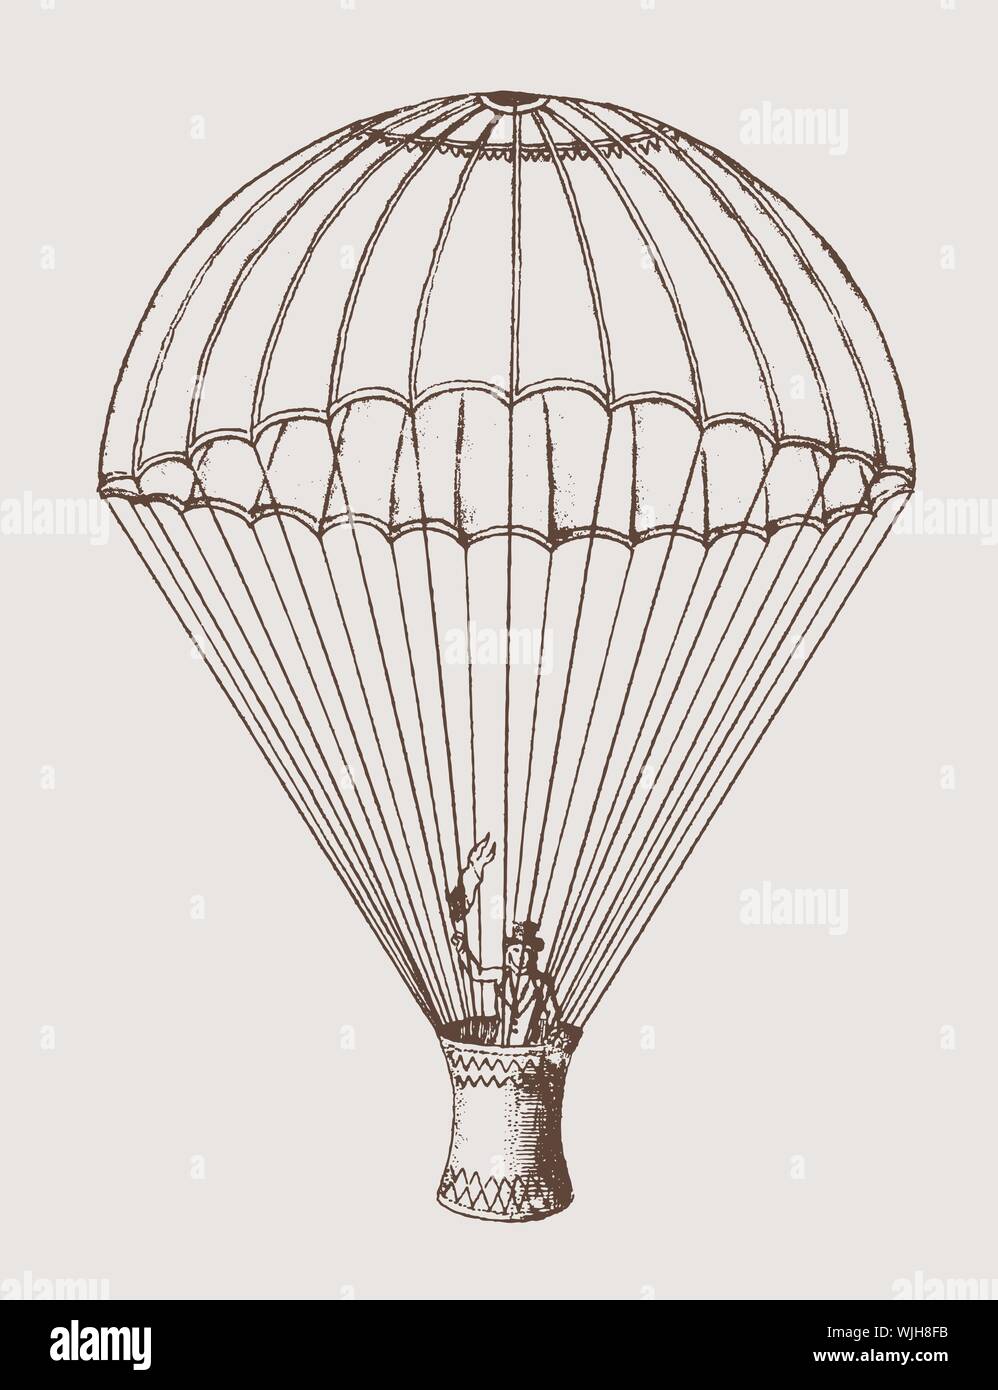 Fully deployed and descending historic parachute with a man standing in the basket and waving a flag. Illustration after an etching from the 19c Stock Vector